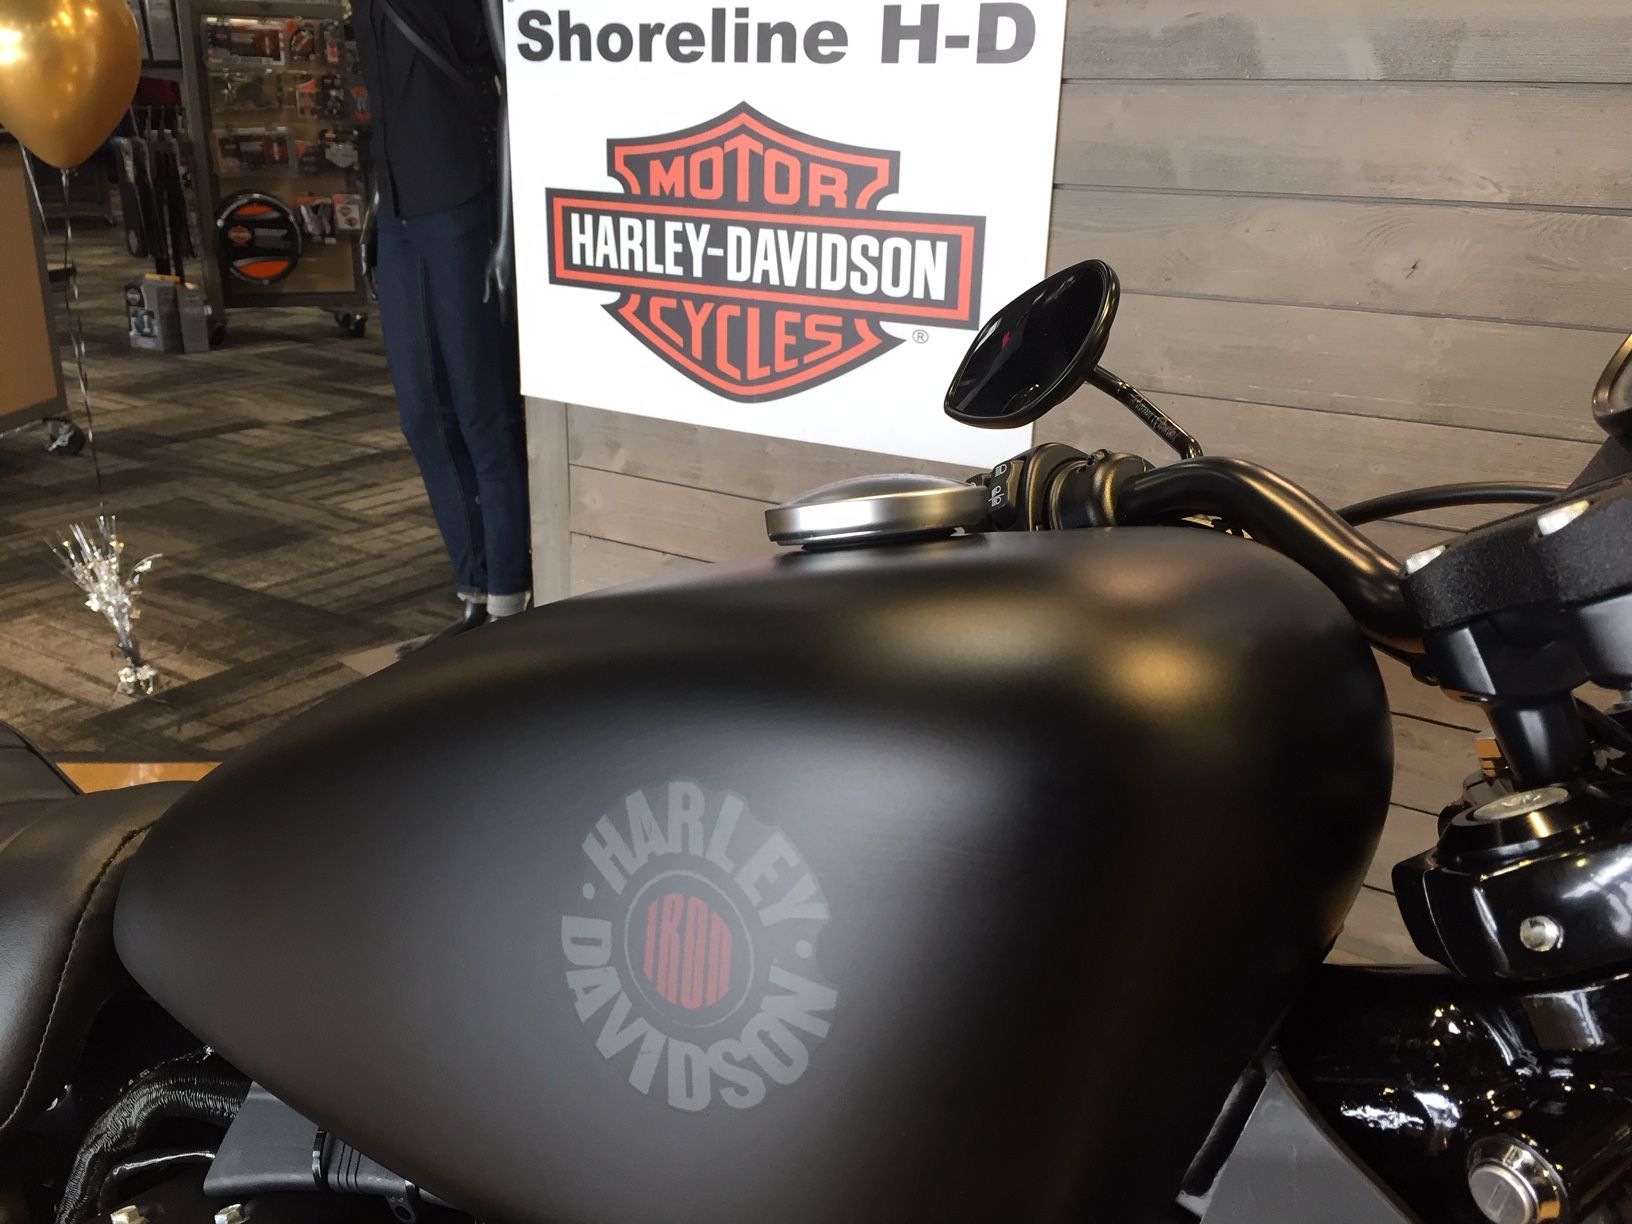 2020 Harley-Davidson IRON 883 in West Long Branch, New Jersey - Photo 6